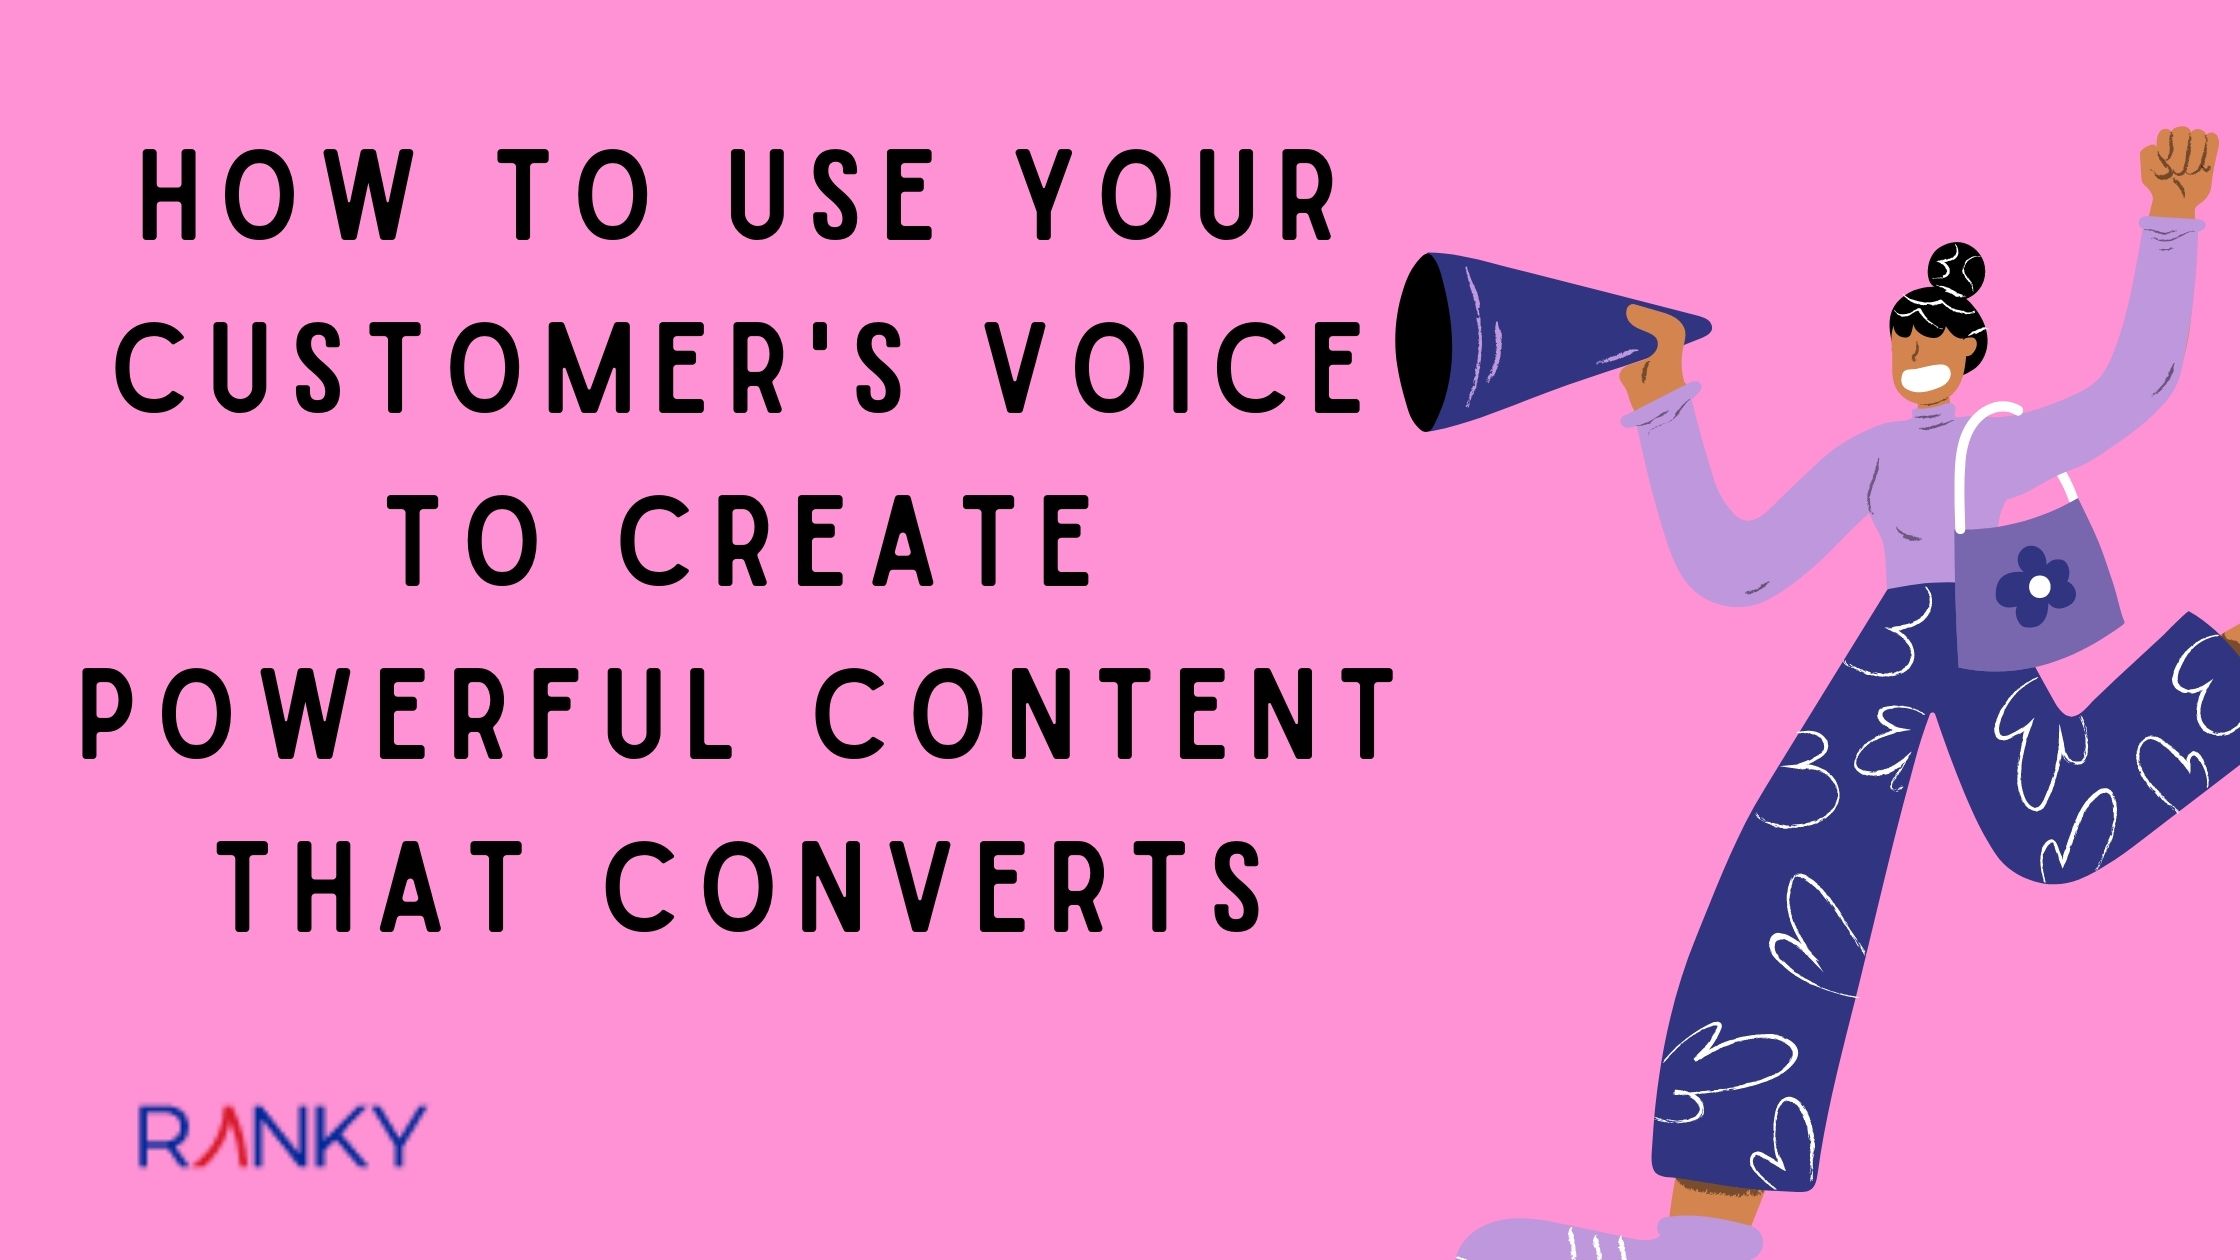 How to Use Your Customer's Voice to Create Powerful Content That Converts